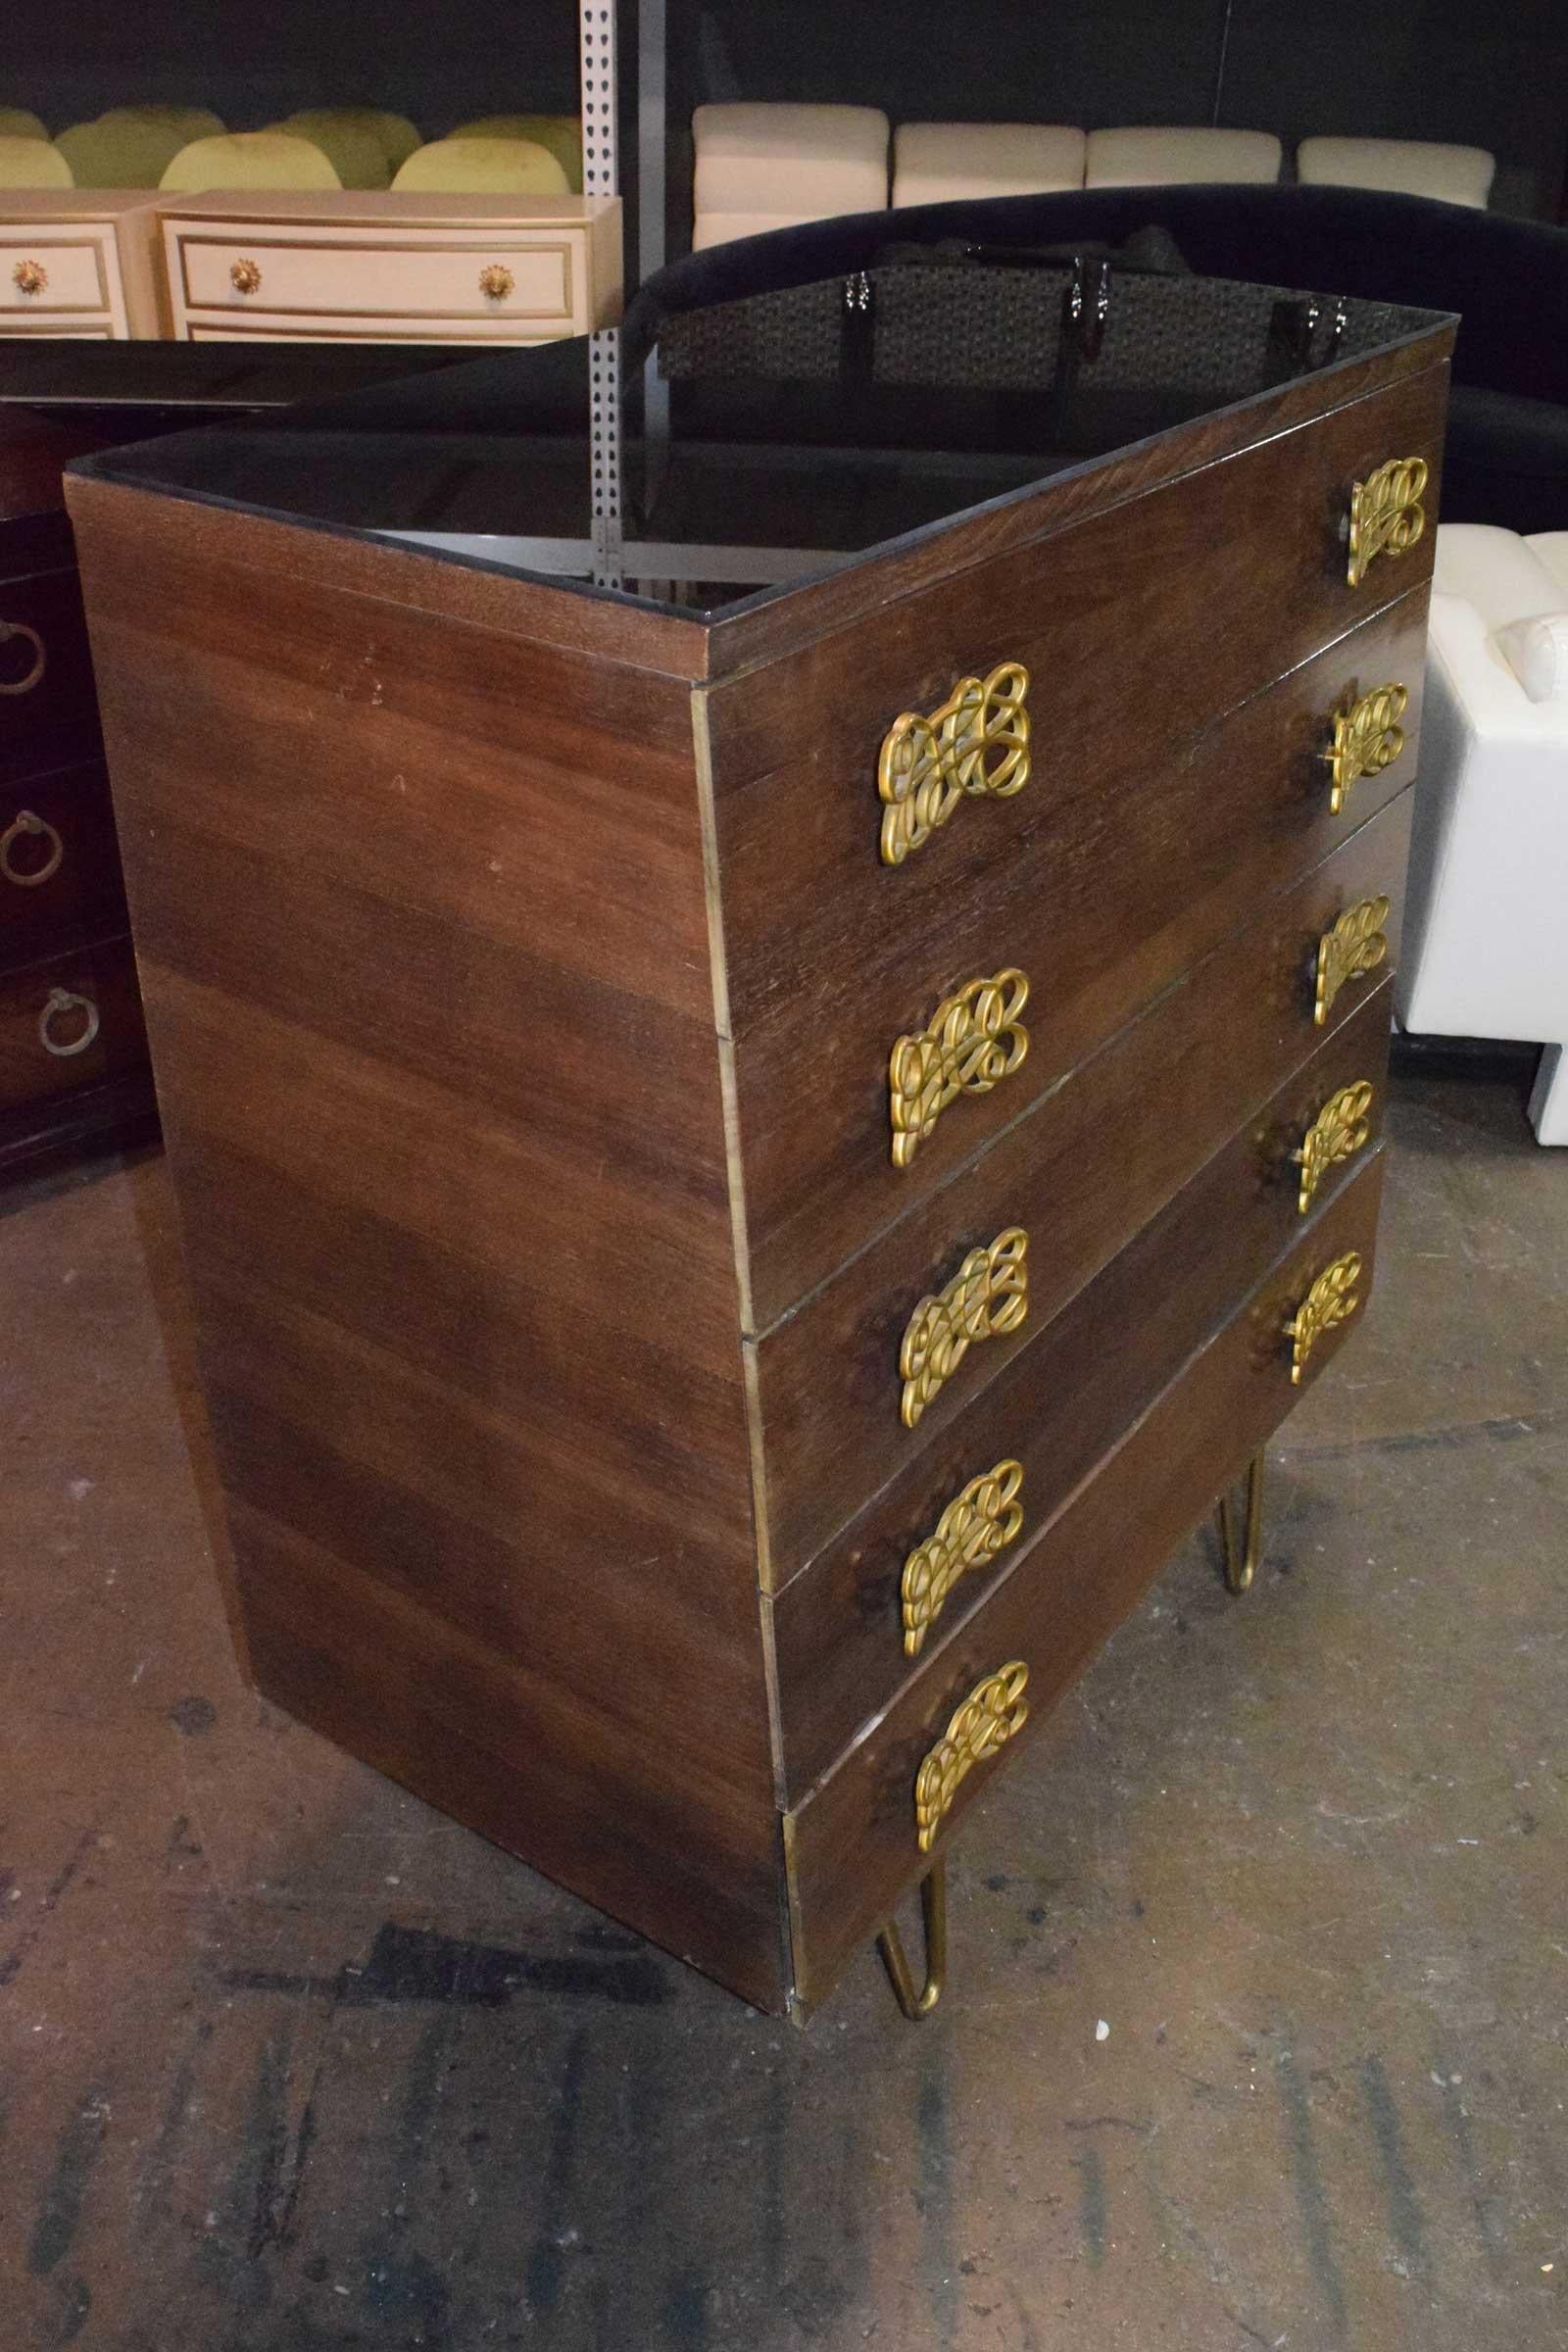 This is a beautiful chest of drawers with lots of interest. The shape displays sculptural interest and is larger on the bottom. The hardware is highly decorative. A protective smoked glass top is included. We also have the matching dresser which we